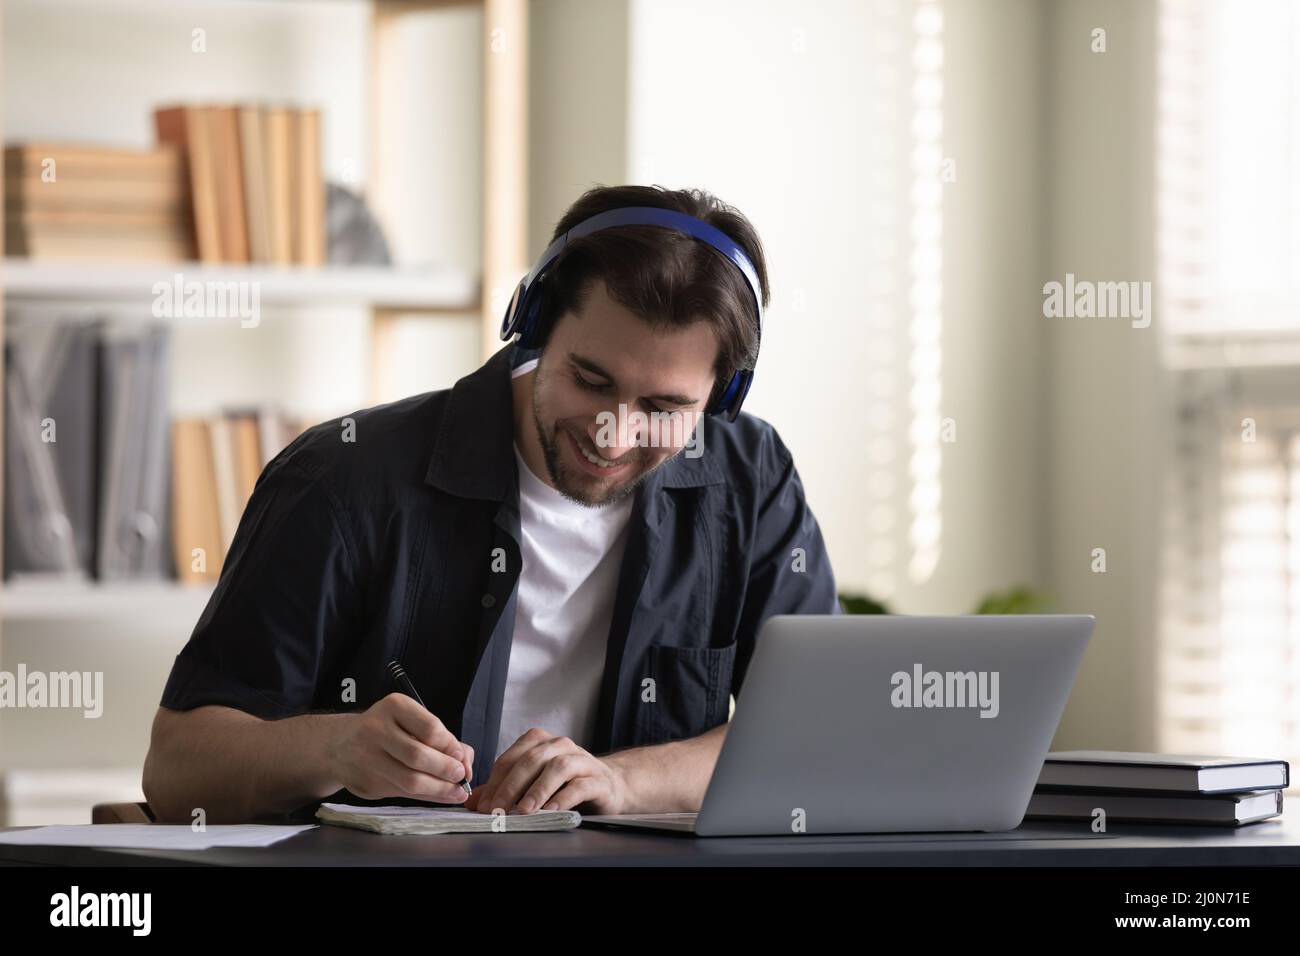 Cheerful student guy in headphones enjoying online studying at laptop Stock Photo